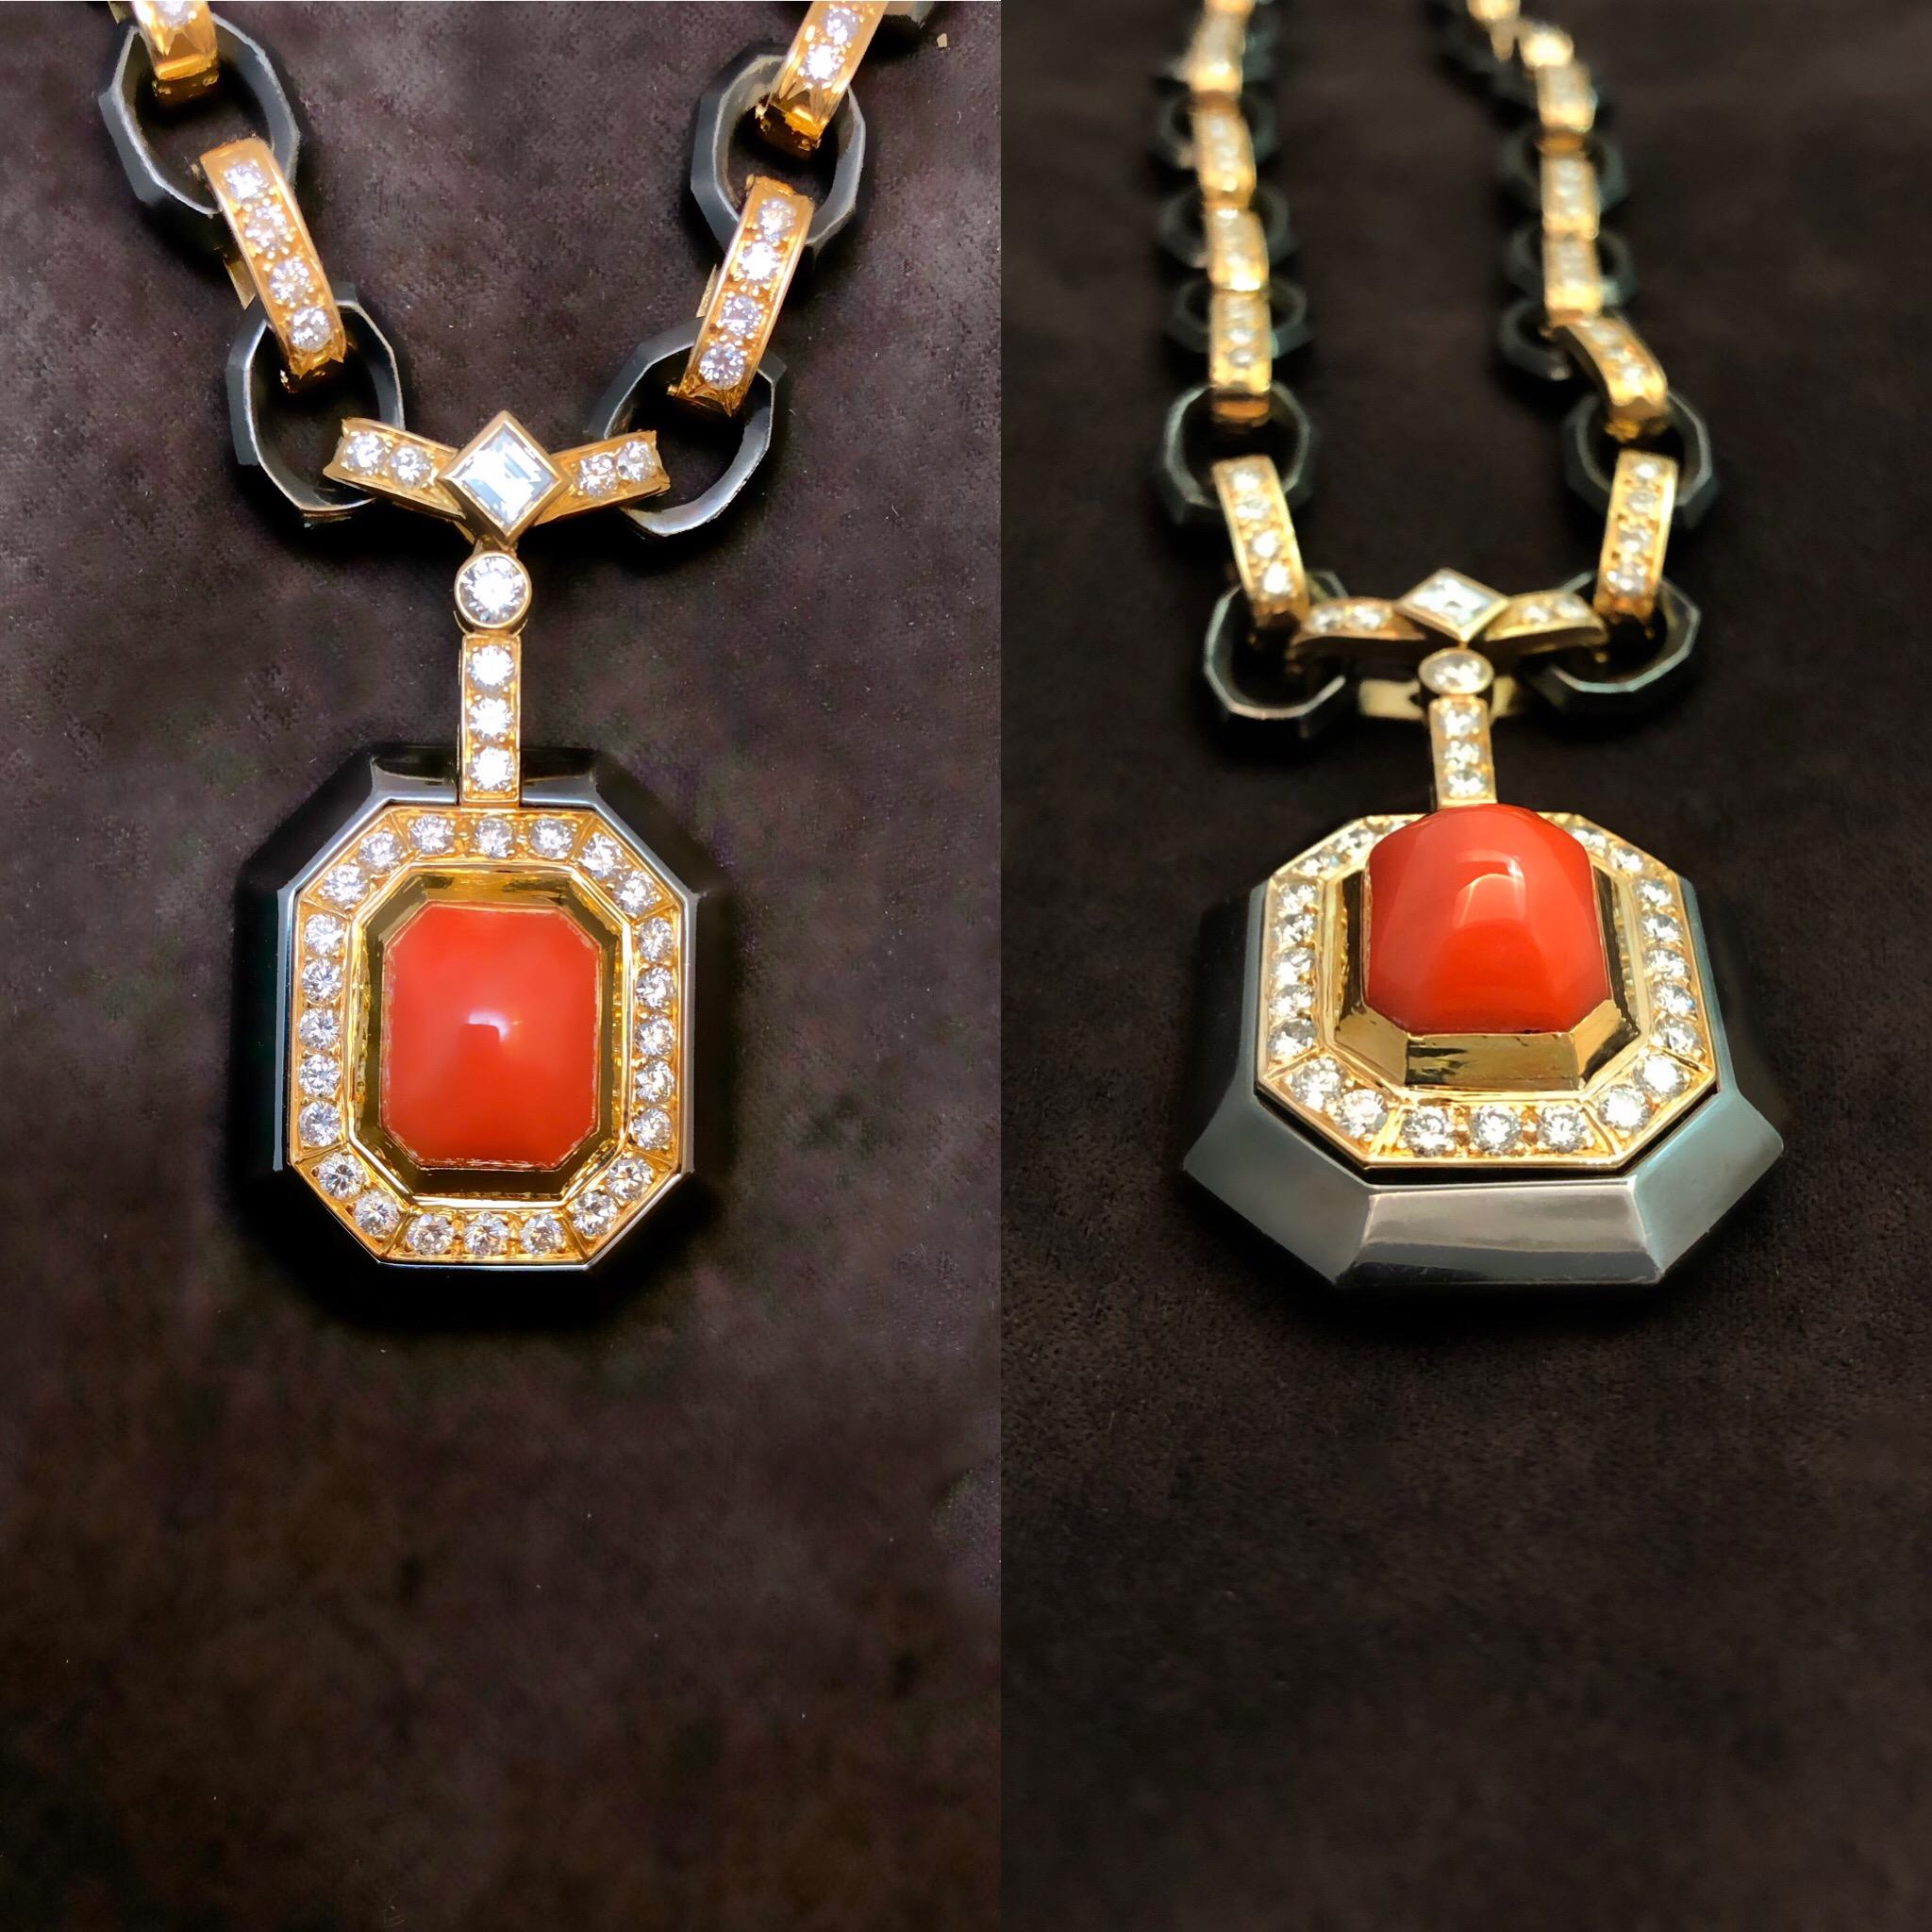 Women's Poiray Necklace coral and diamonds